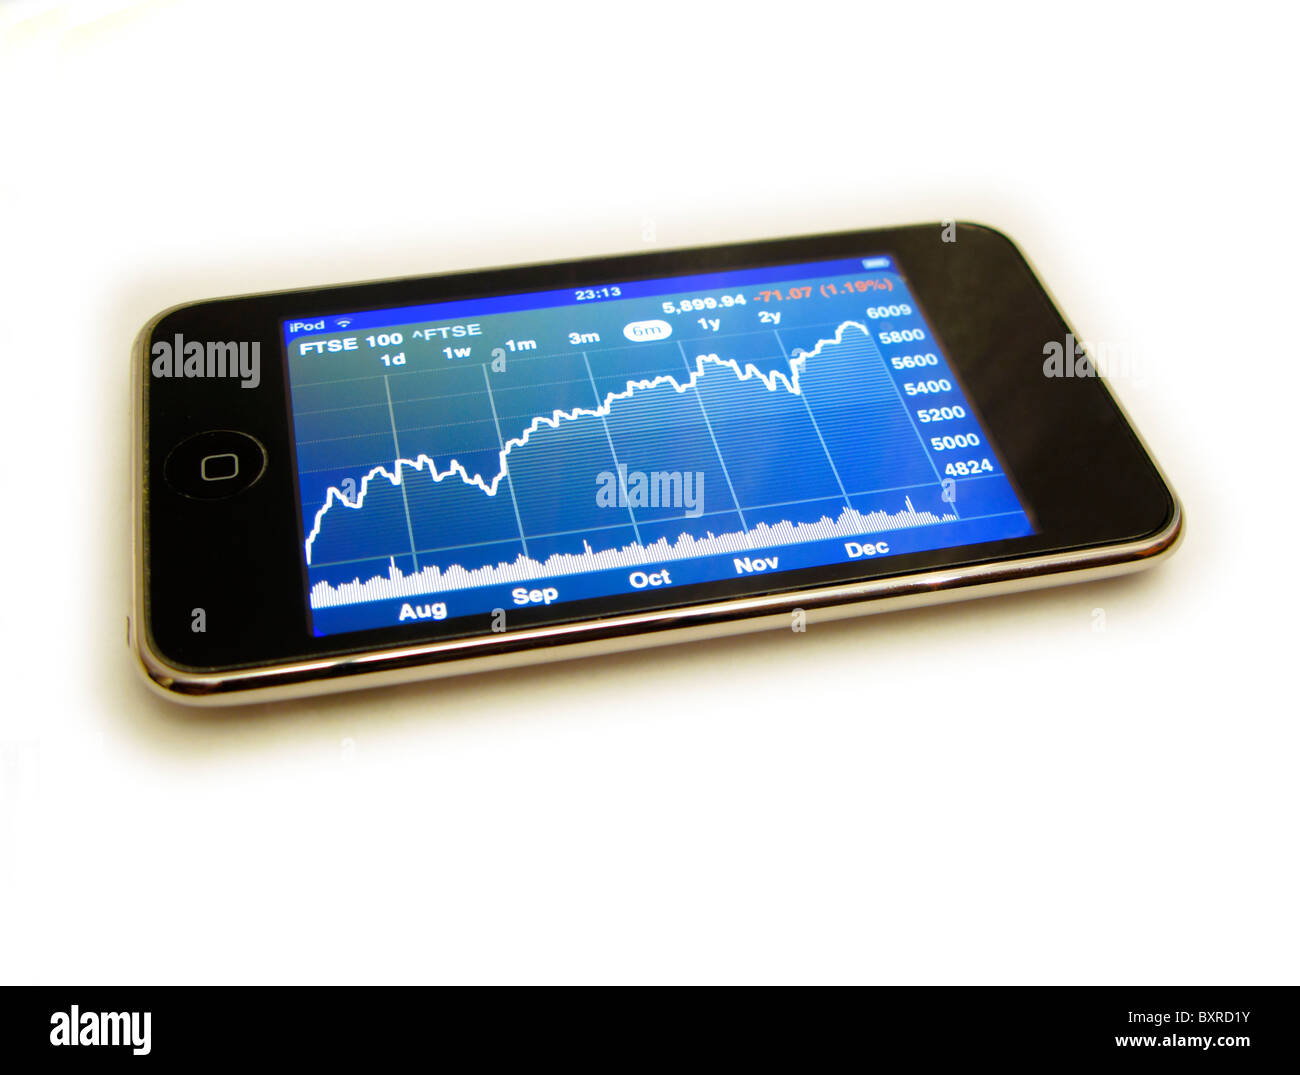 cutout of ipod touch showing FTSE 100 stock market graph to end of 2010 on white background Stock Photo